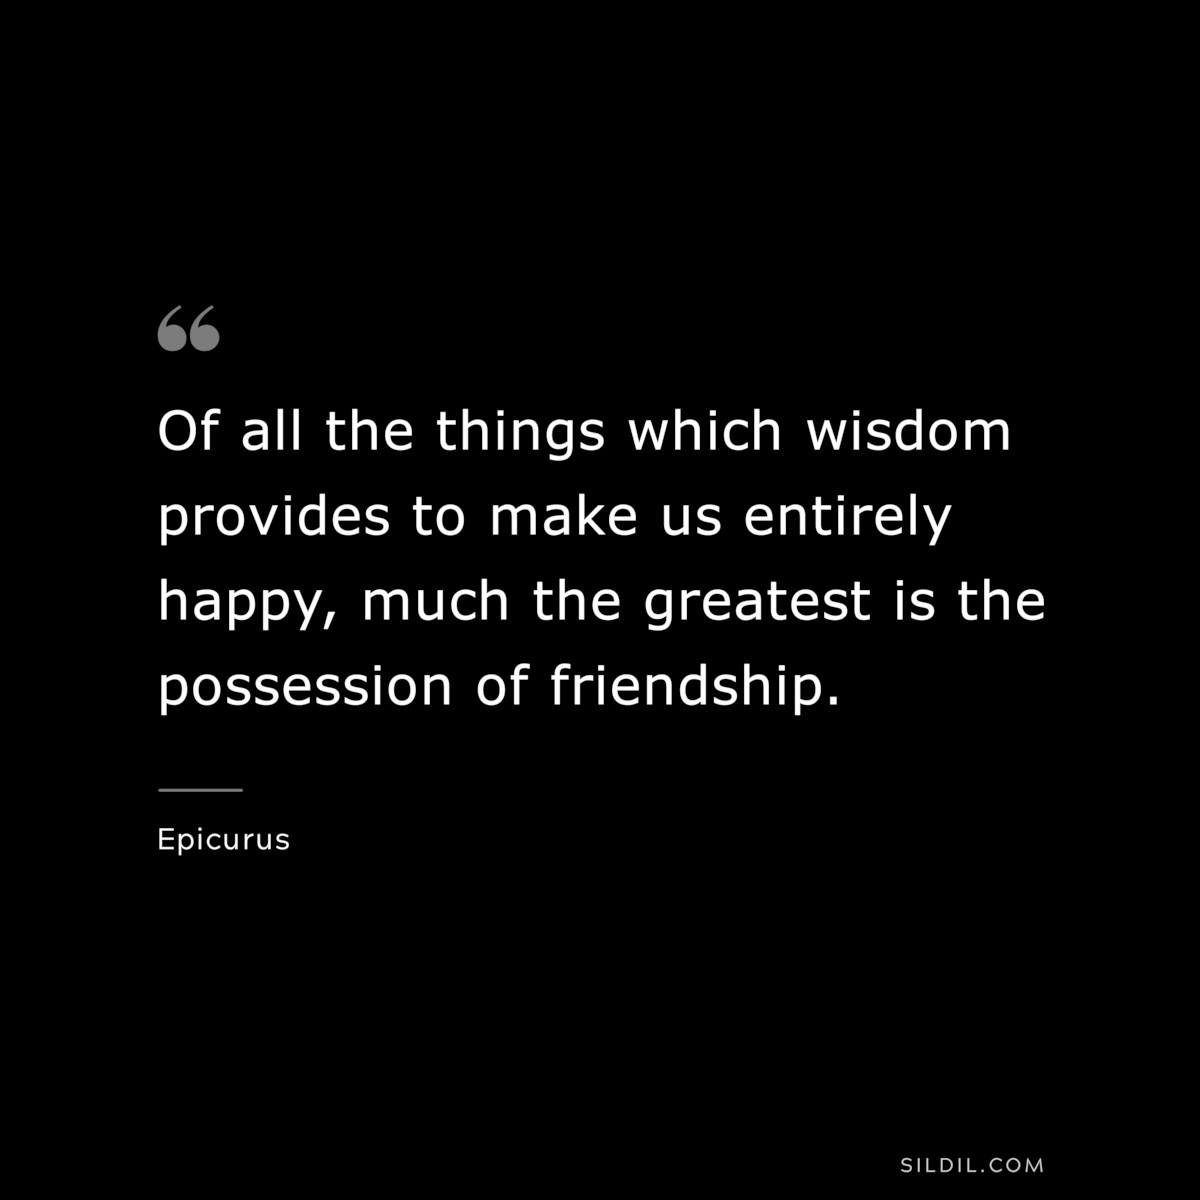 Of all the things which wisdom provides to make us entirely happy, much the greatest is the possession of friendship. — Epicurus